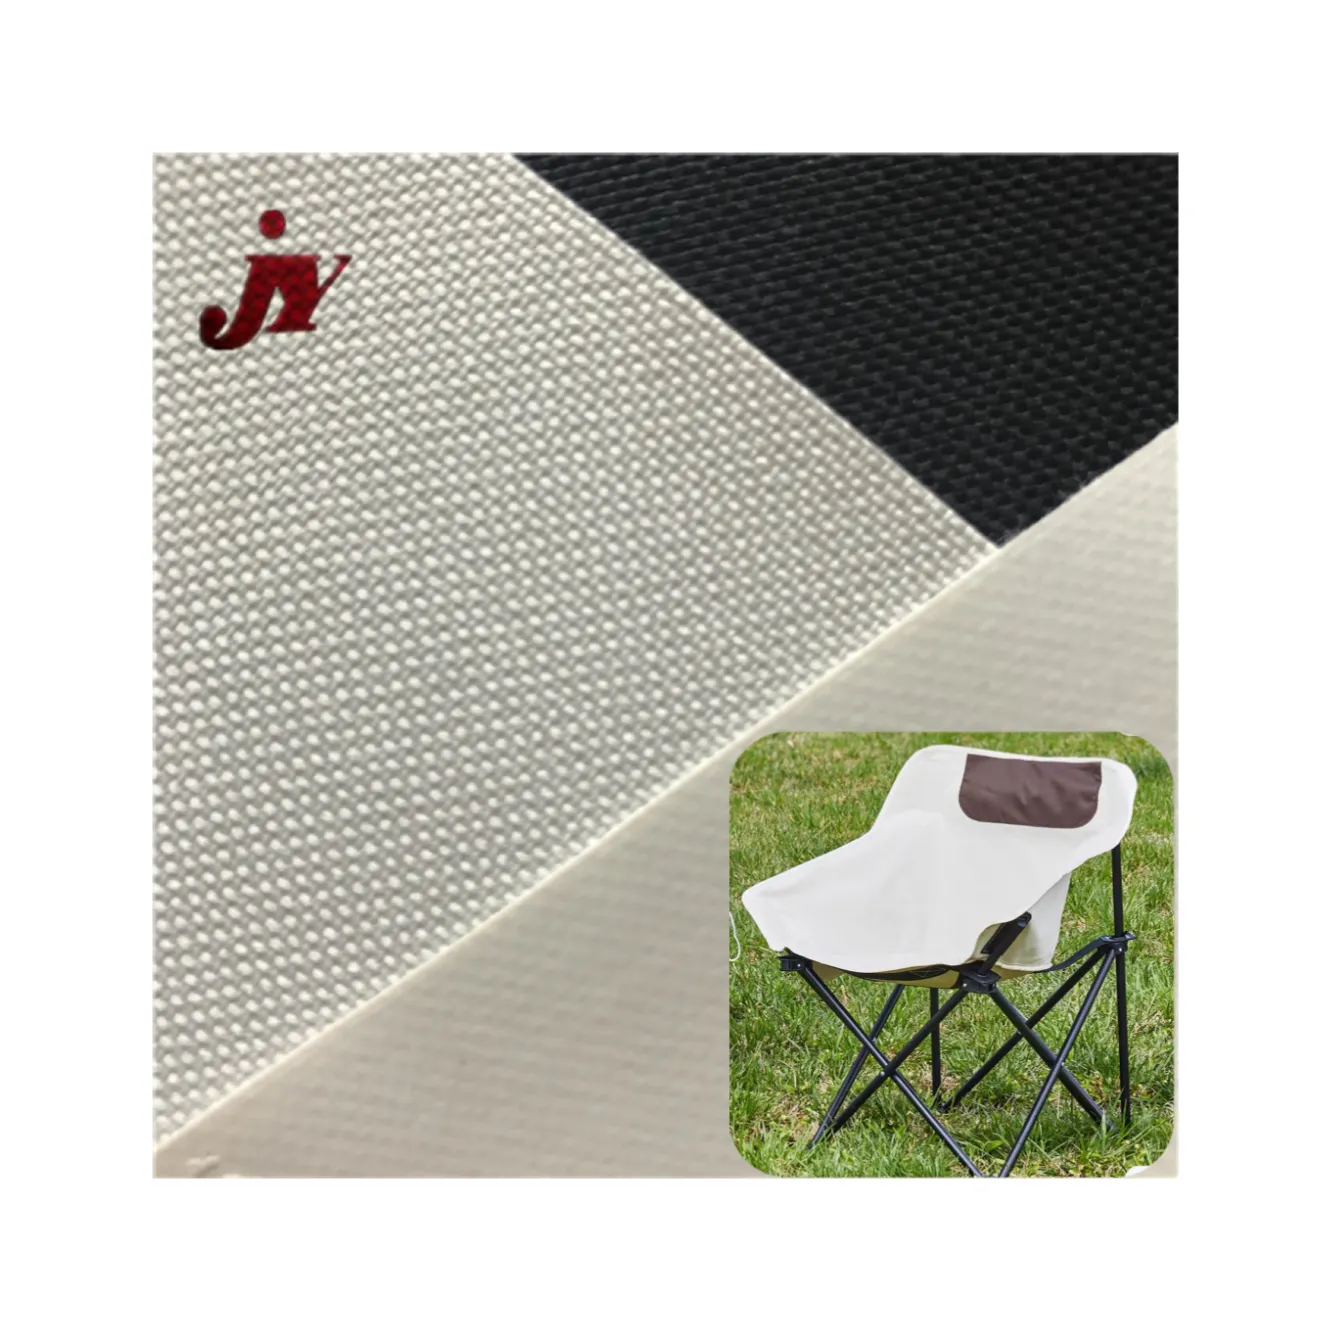 Outdoor Waterproof Fabric Cordura Fabric Oxford Fabric Pvc Coated For Folding Picnic Chair